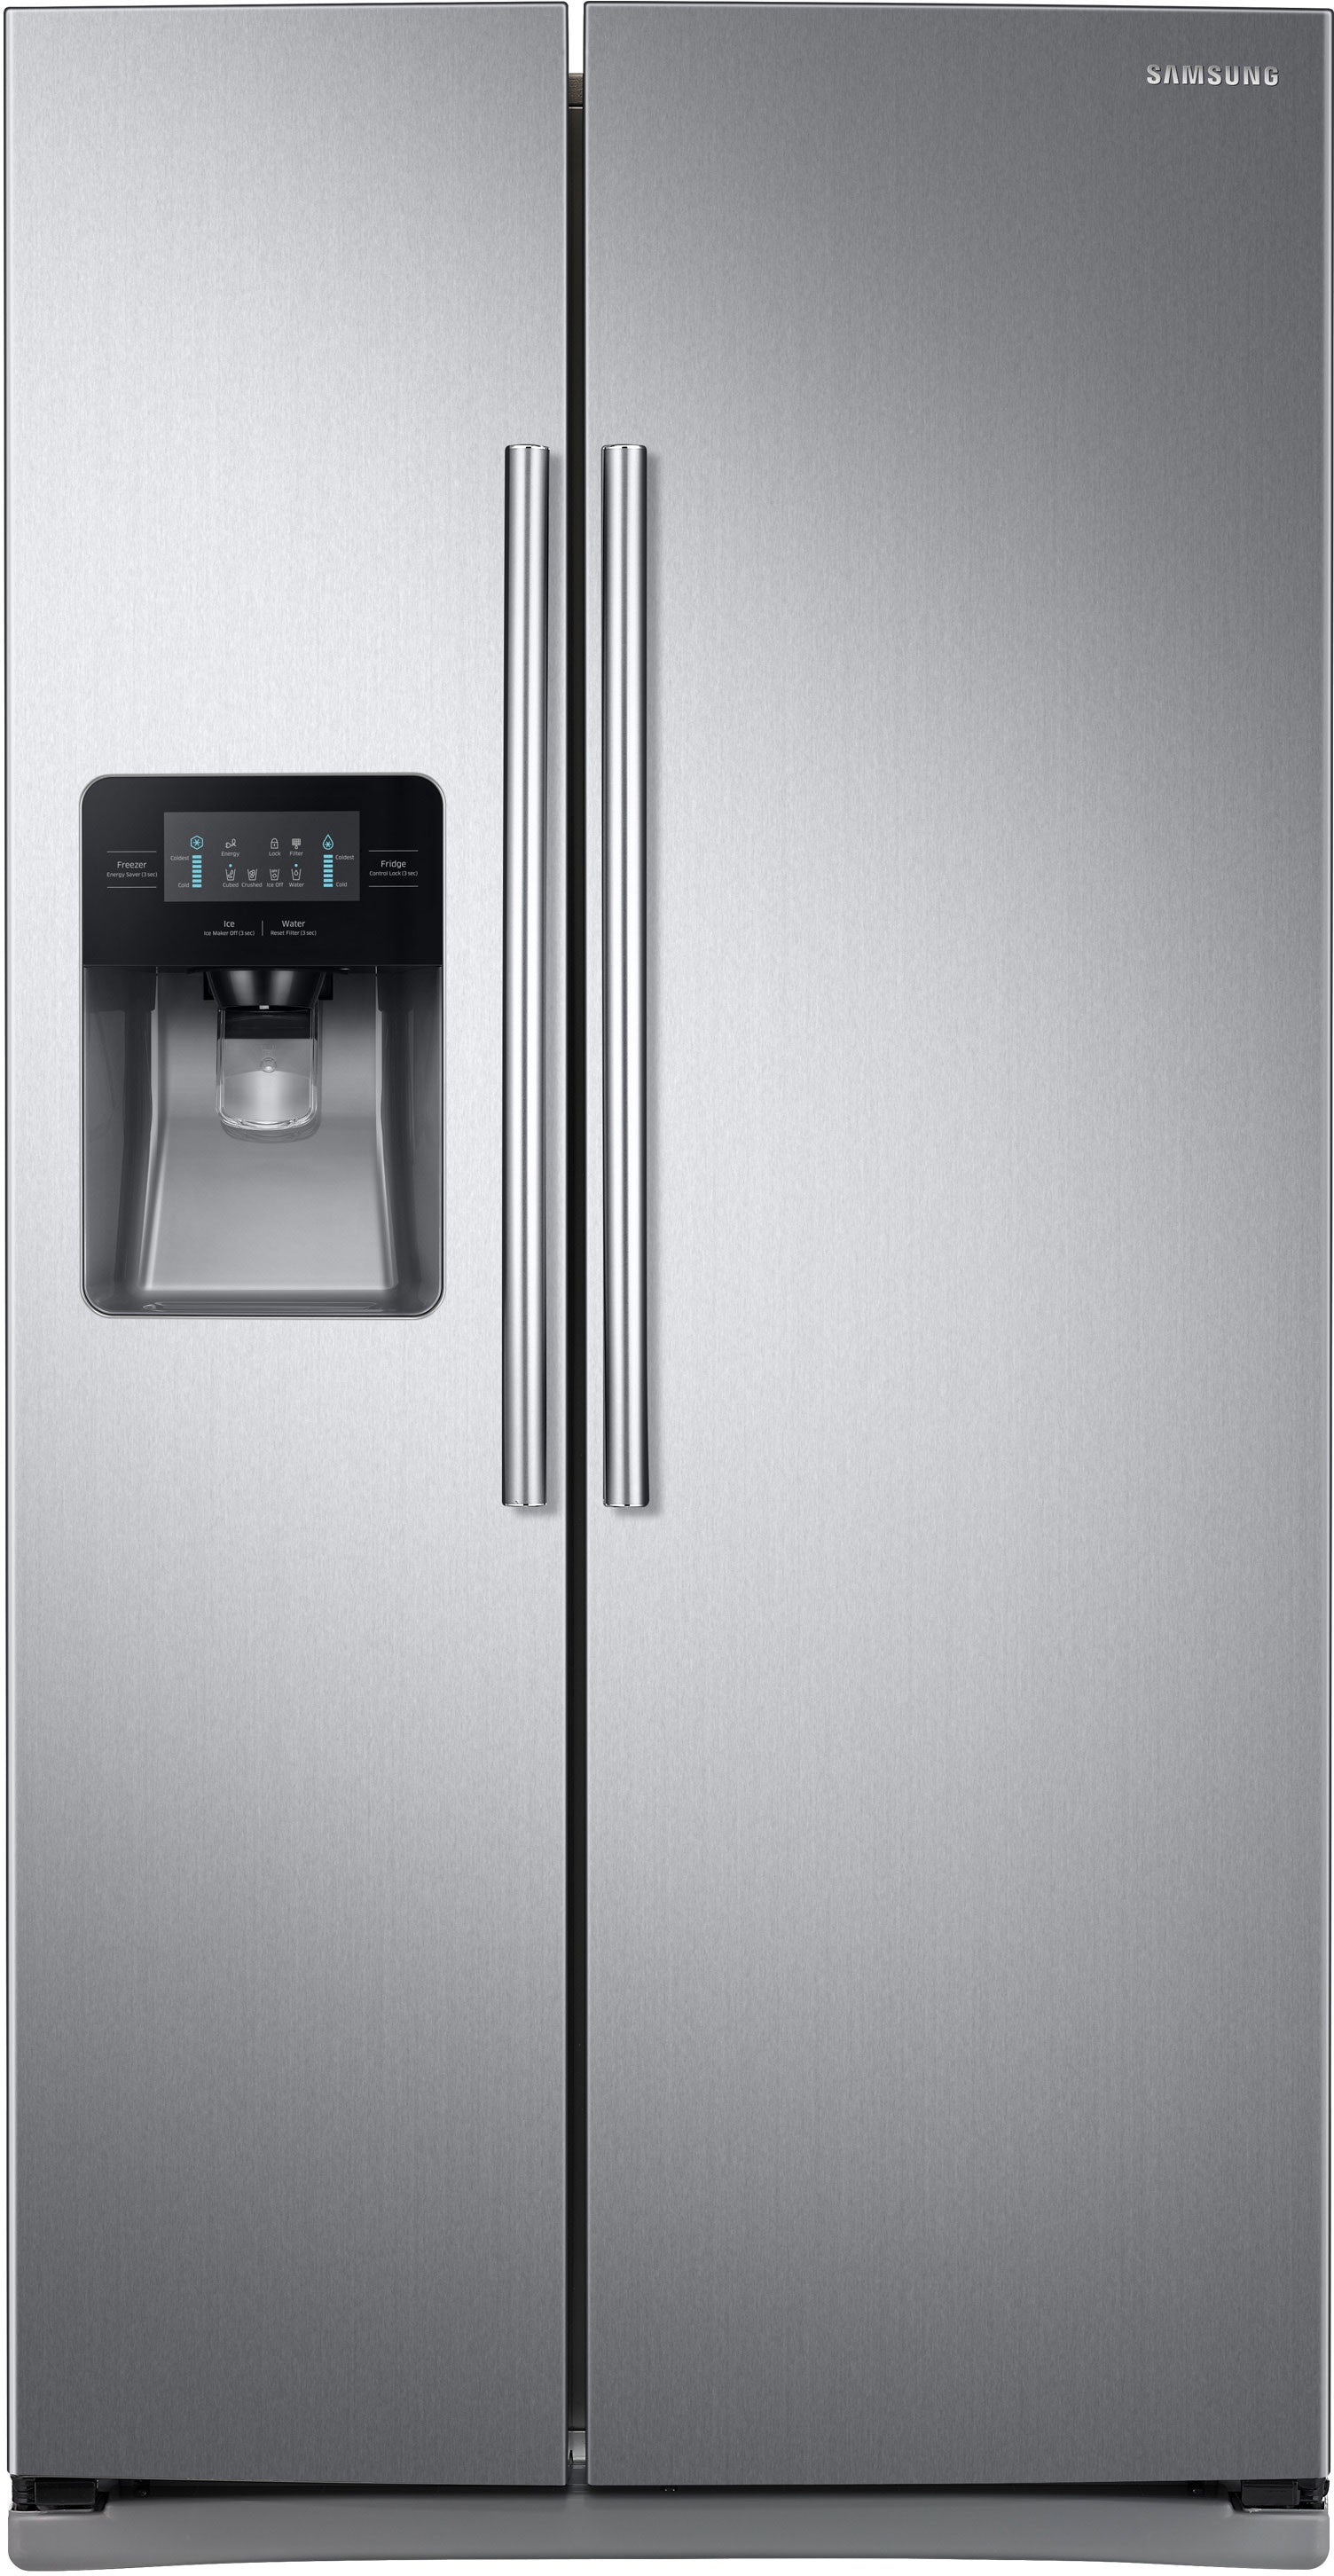 Samsung RS25J500DSR/AA 24.5 Cu. Ft. Side-by-side Refrigerator - Samsung Parts USA